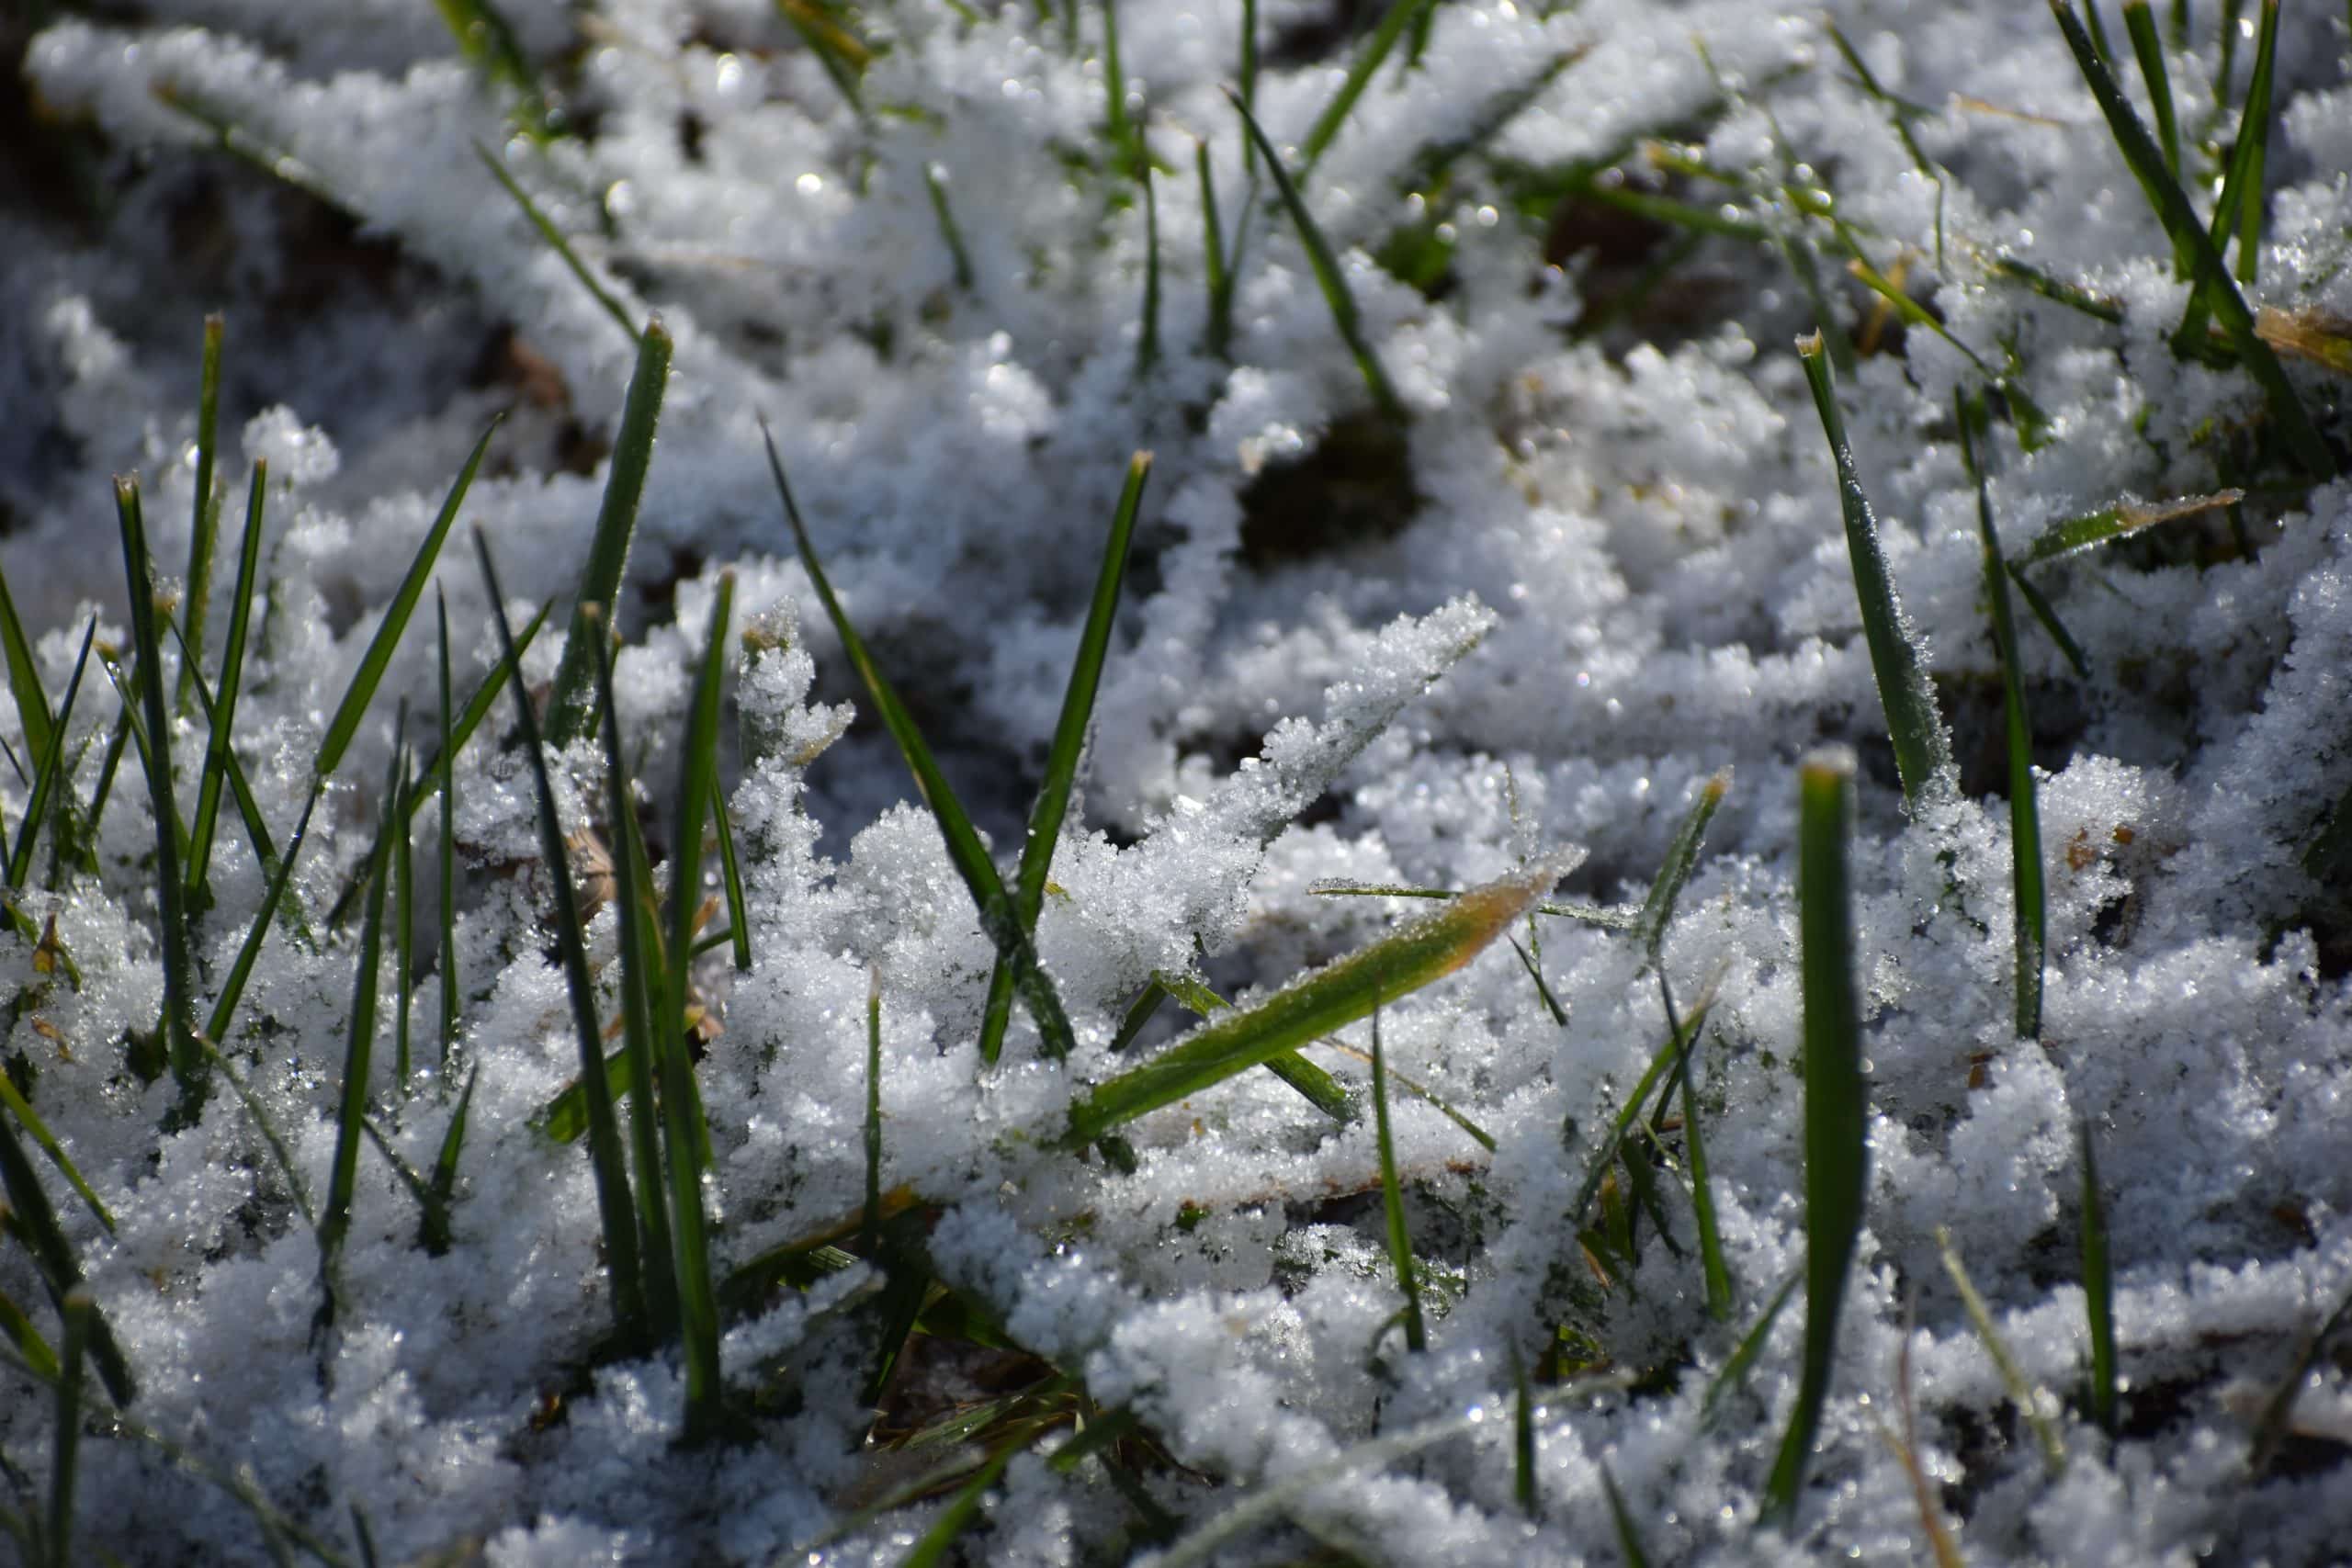 Grass blades pushing up through the snow.